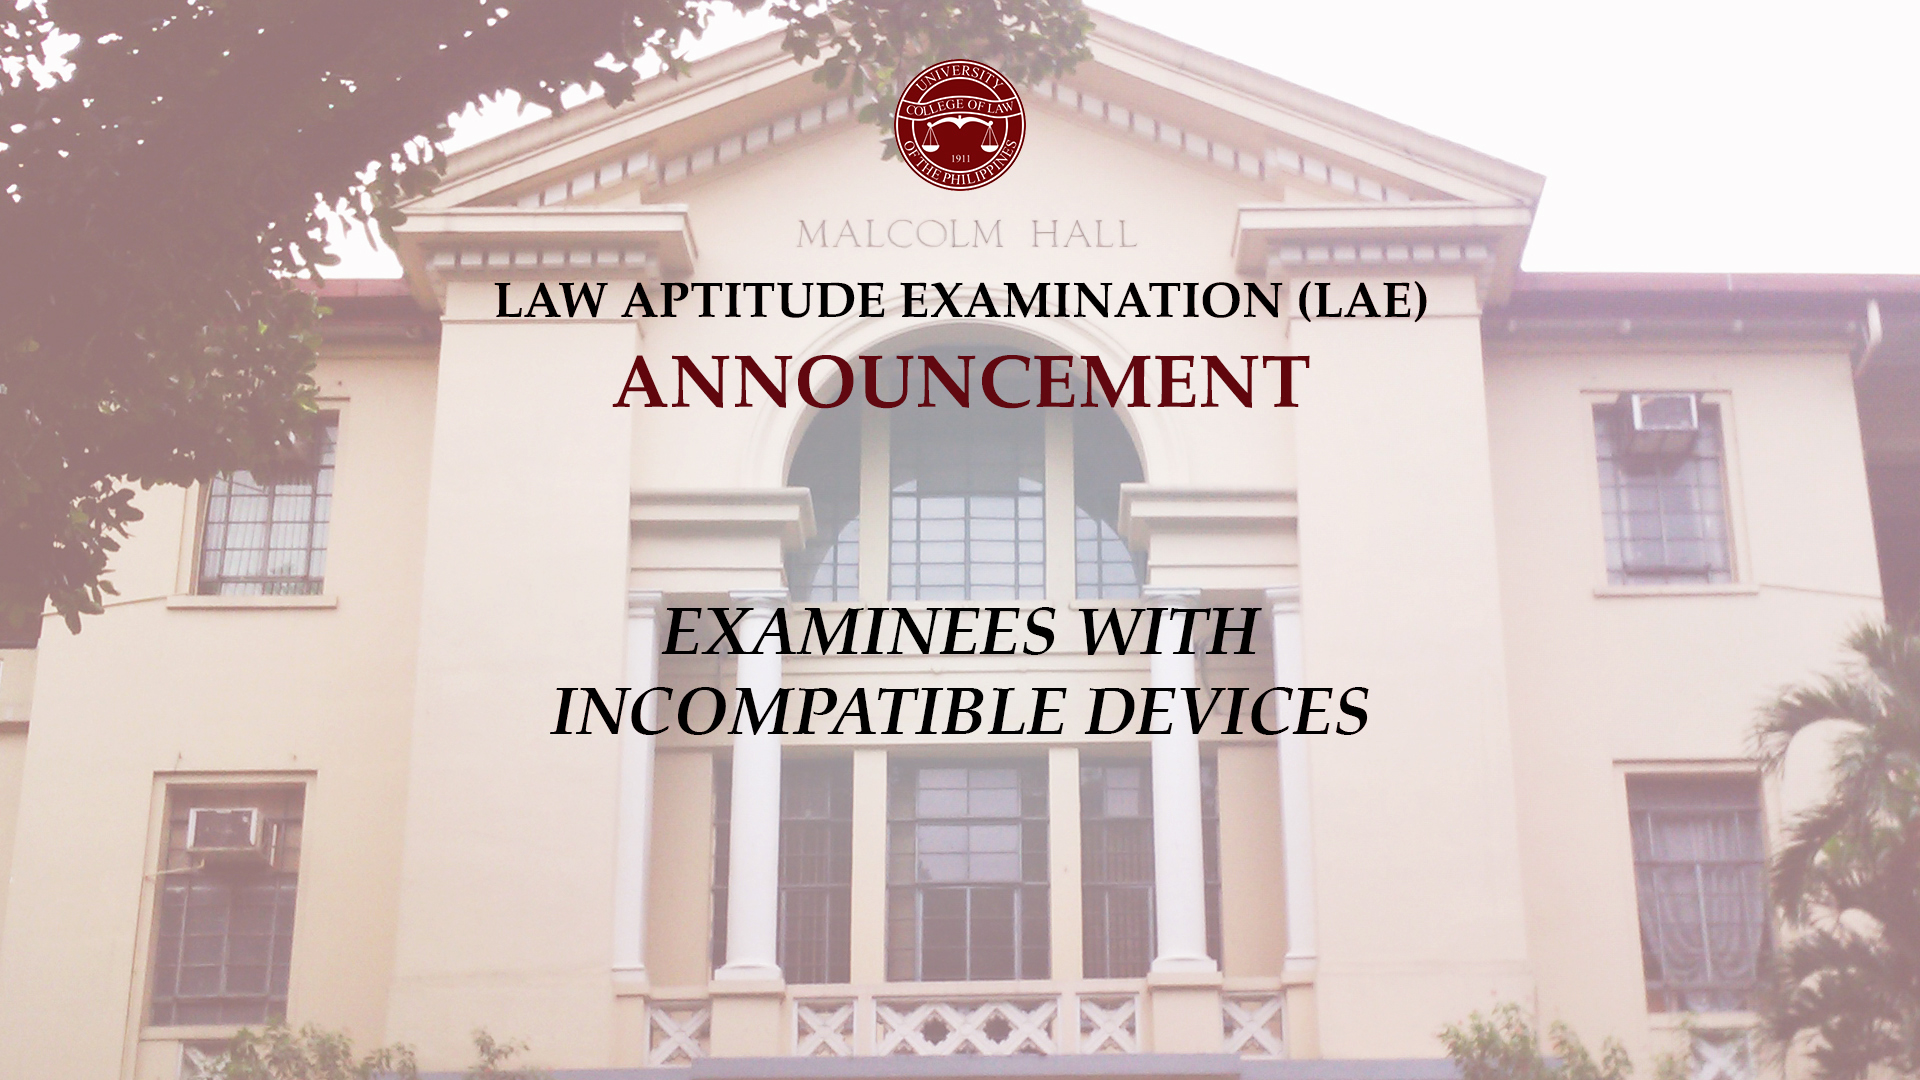 Examinees with Incompatible Devices